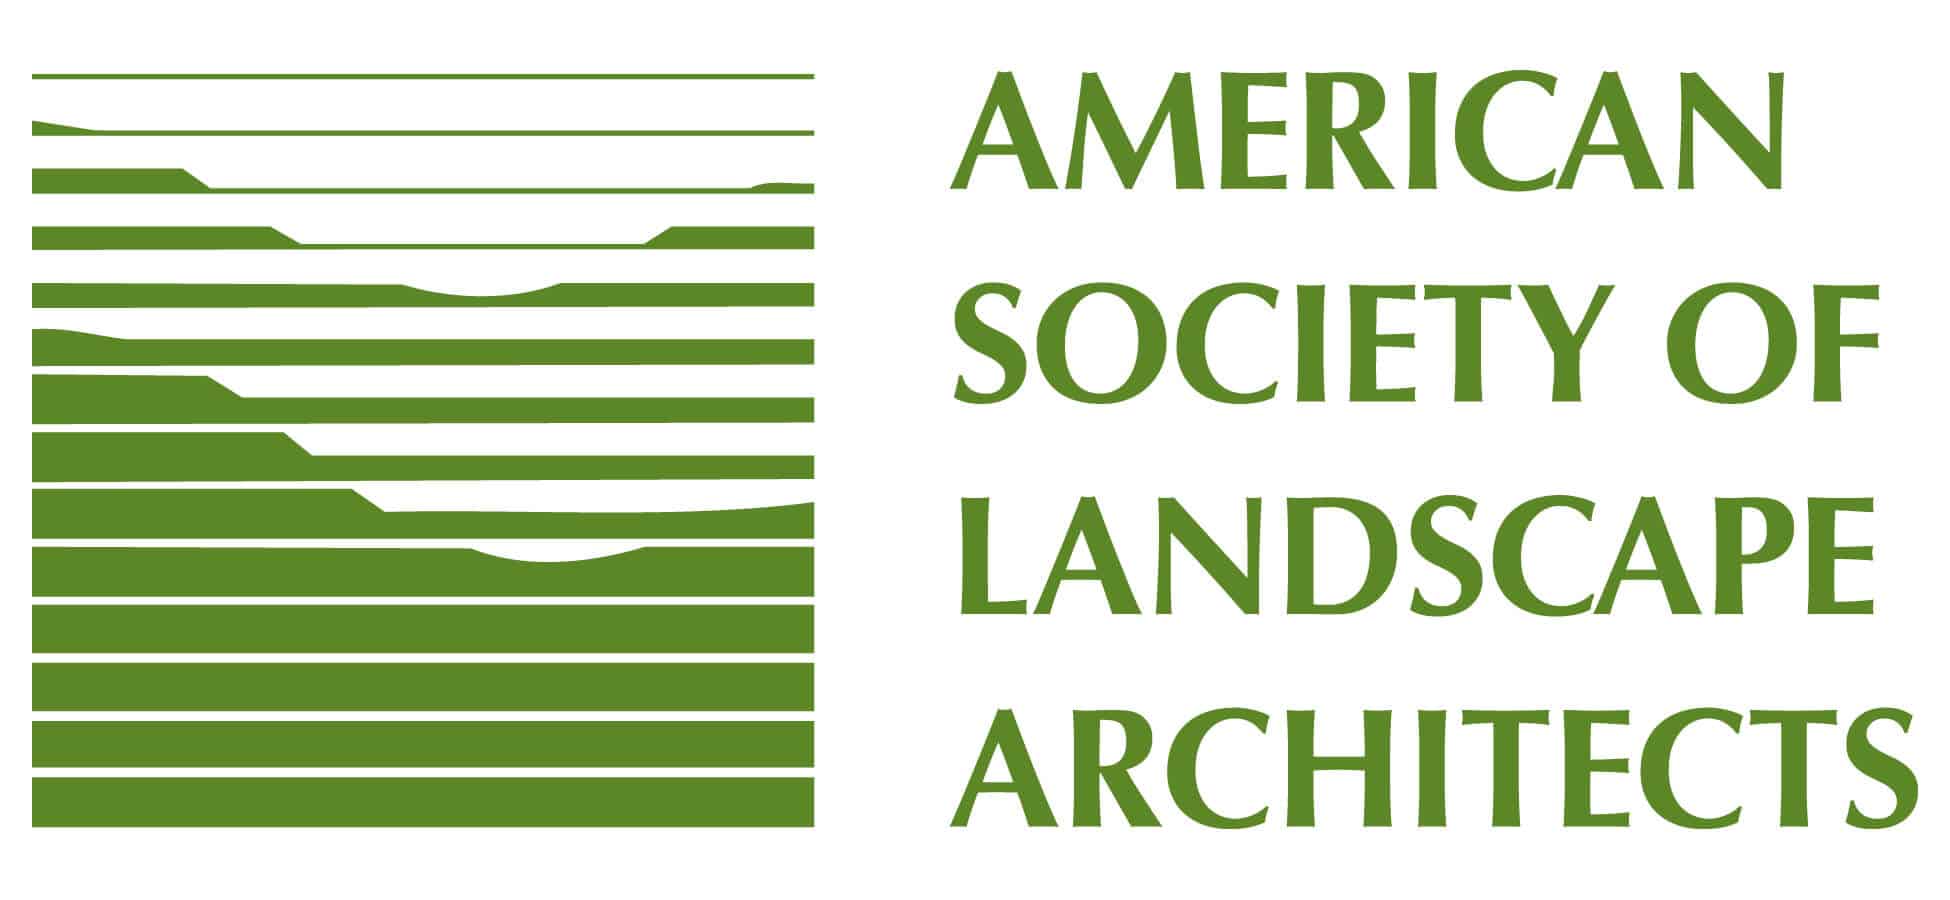 American Society of Landscape Architects - Houston Pool Company Team - Marquise Pools